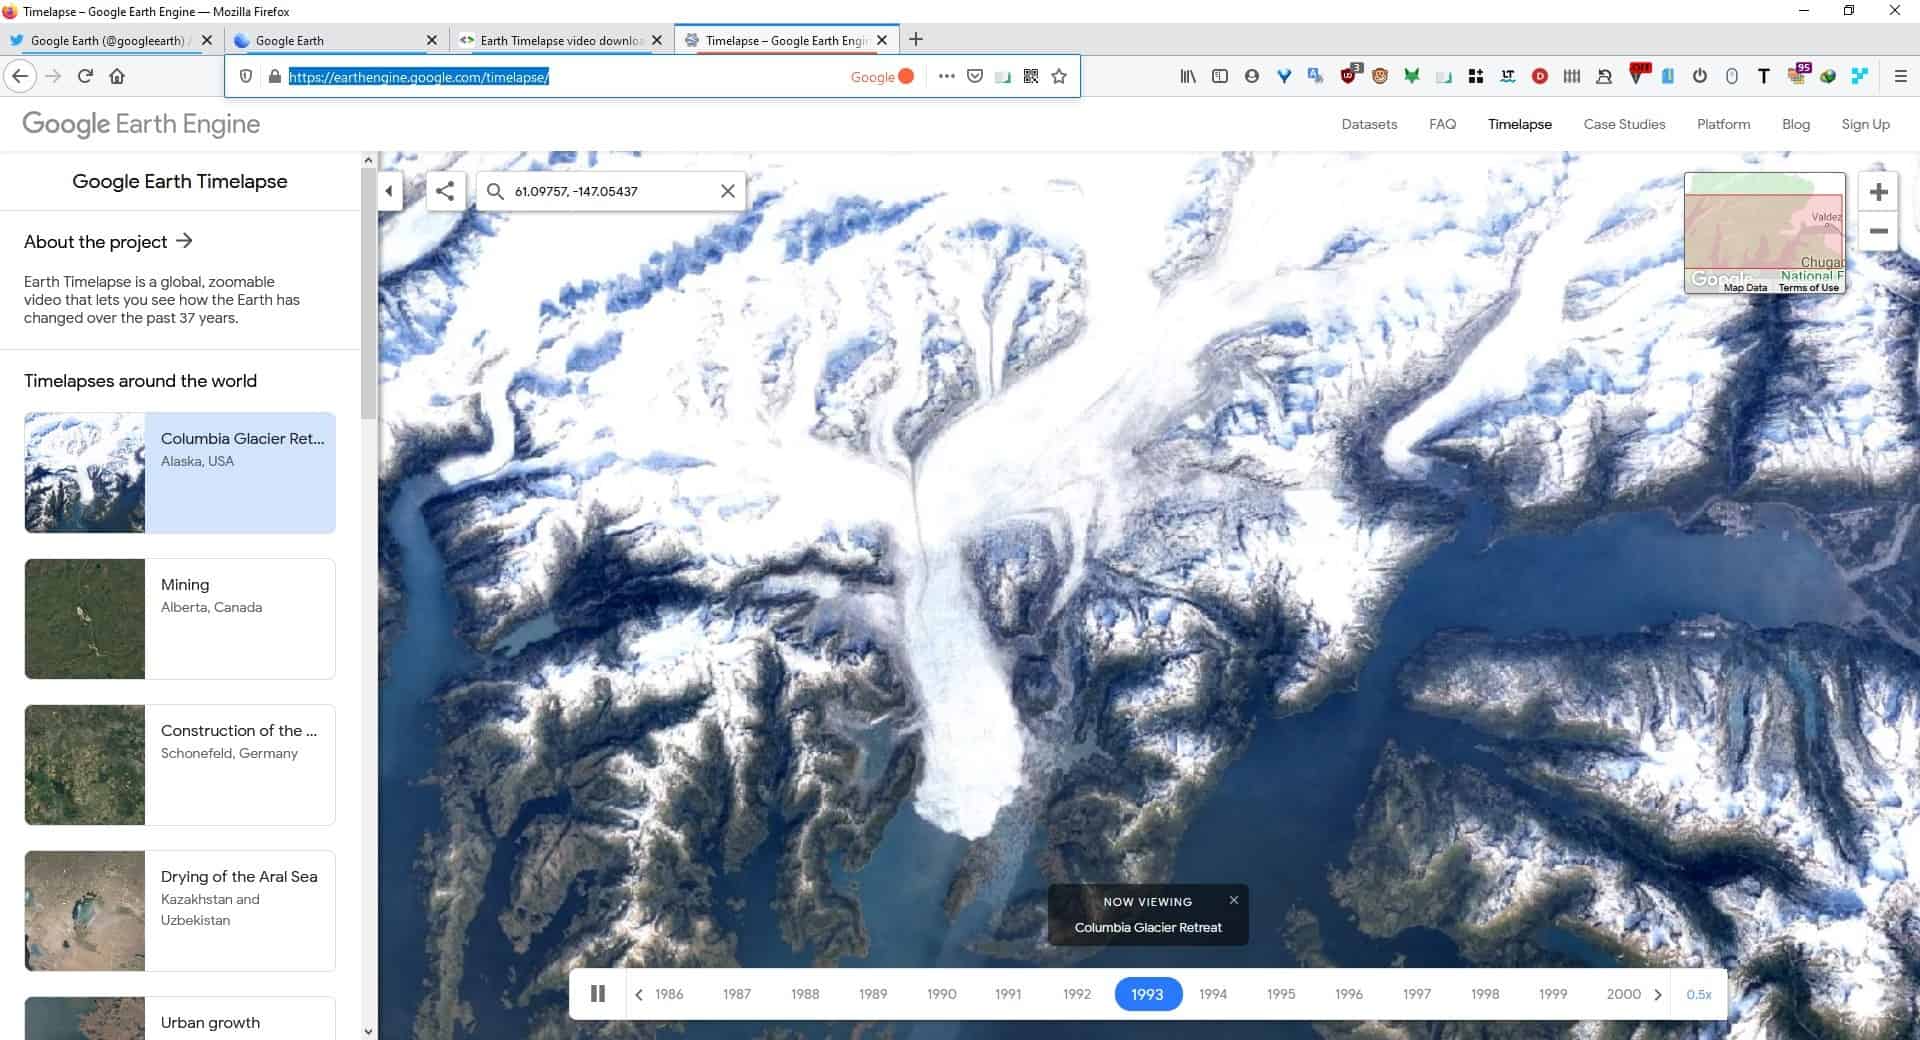 Google Earth's Timelapse feature shows videos of how the planet has changed over 30 years